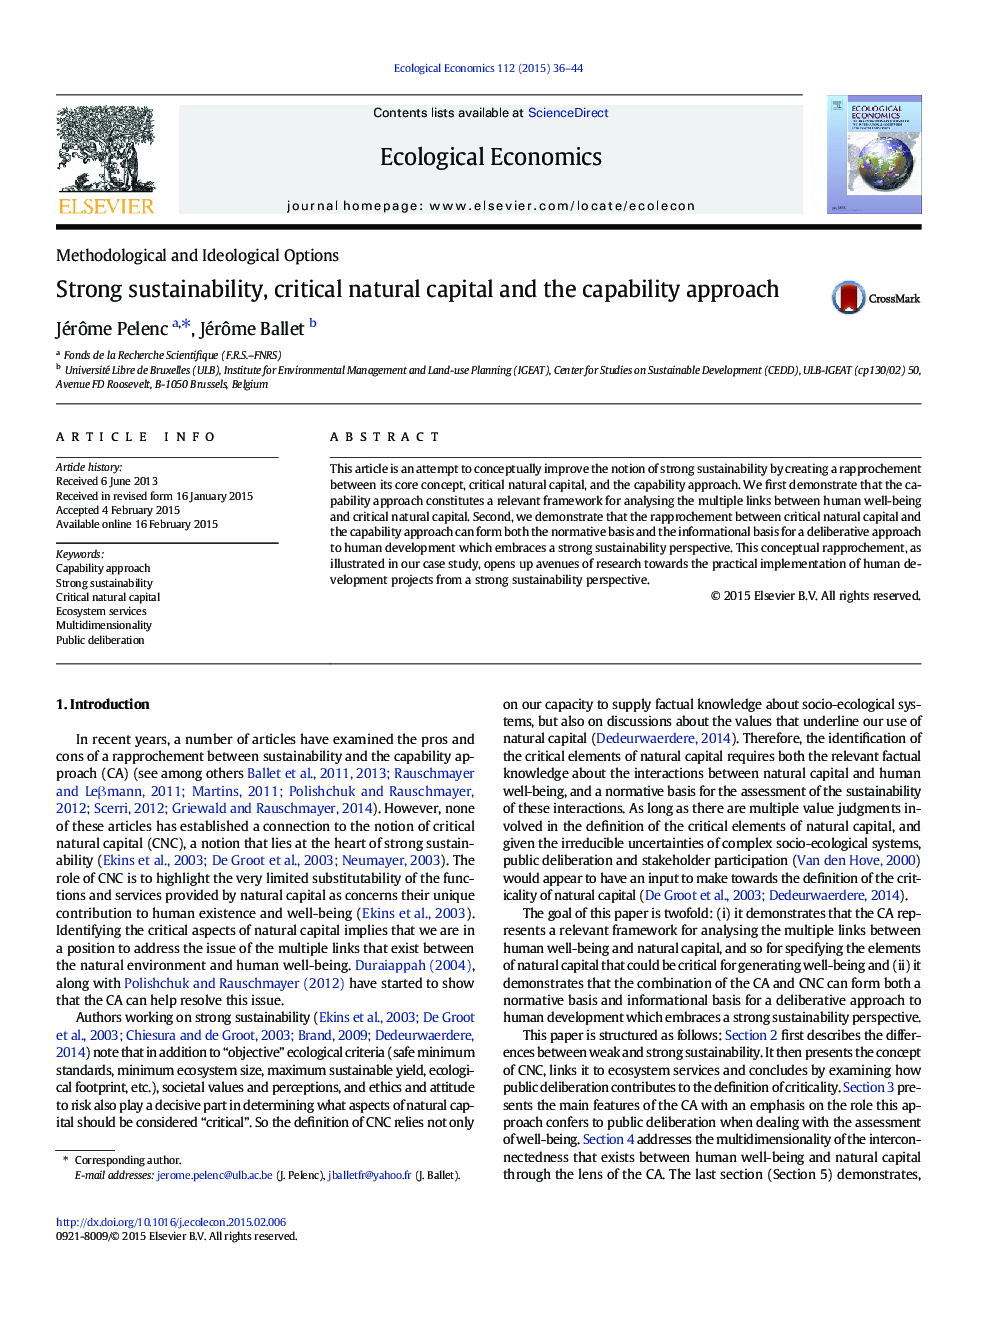 Strong sustainability, critical natural capital and the capability approach